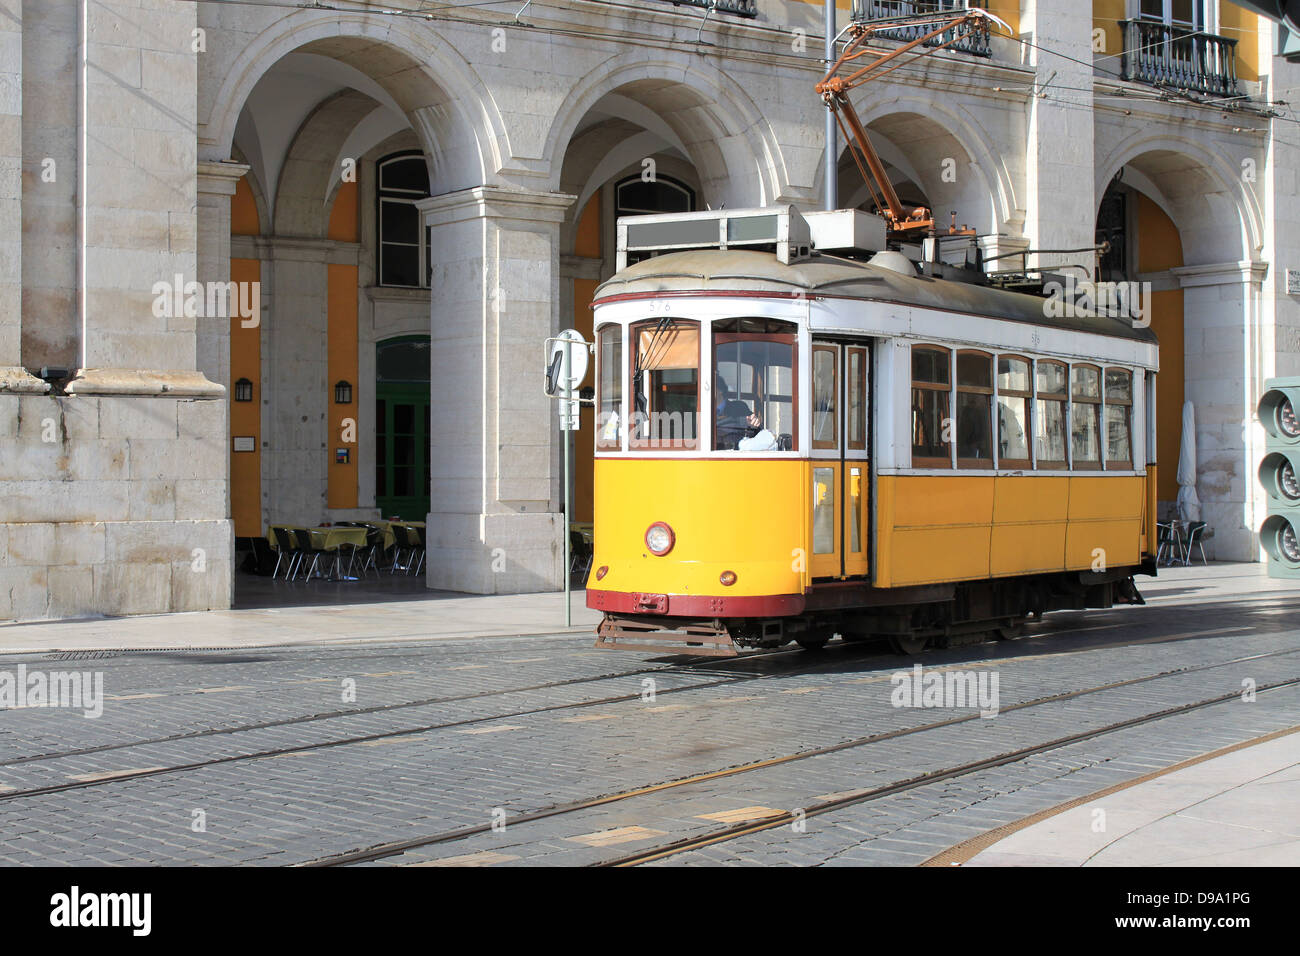 Yellow streetcar or tram in Lisbon, Portugal, Europe Stock Photo